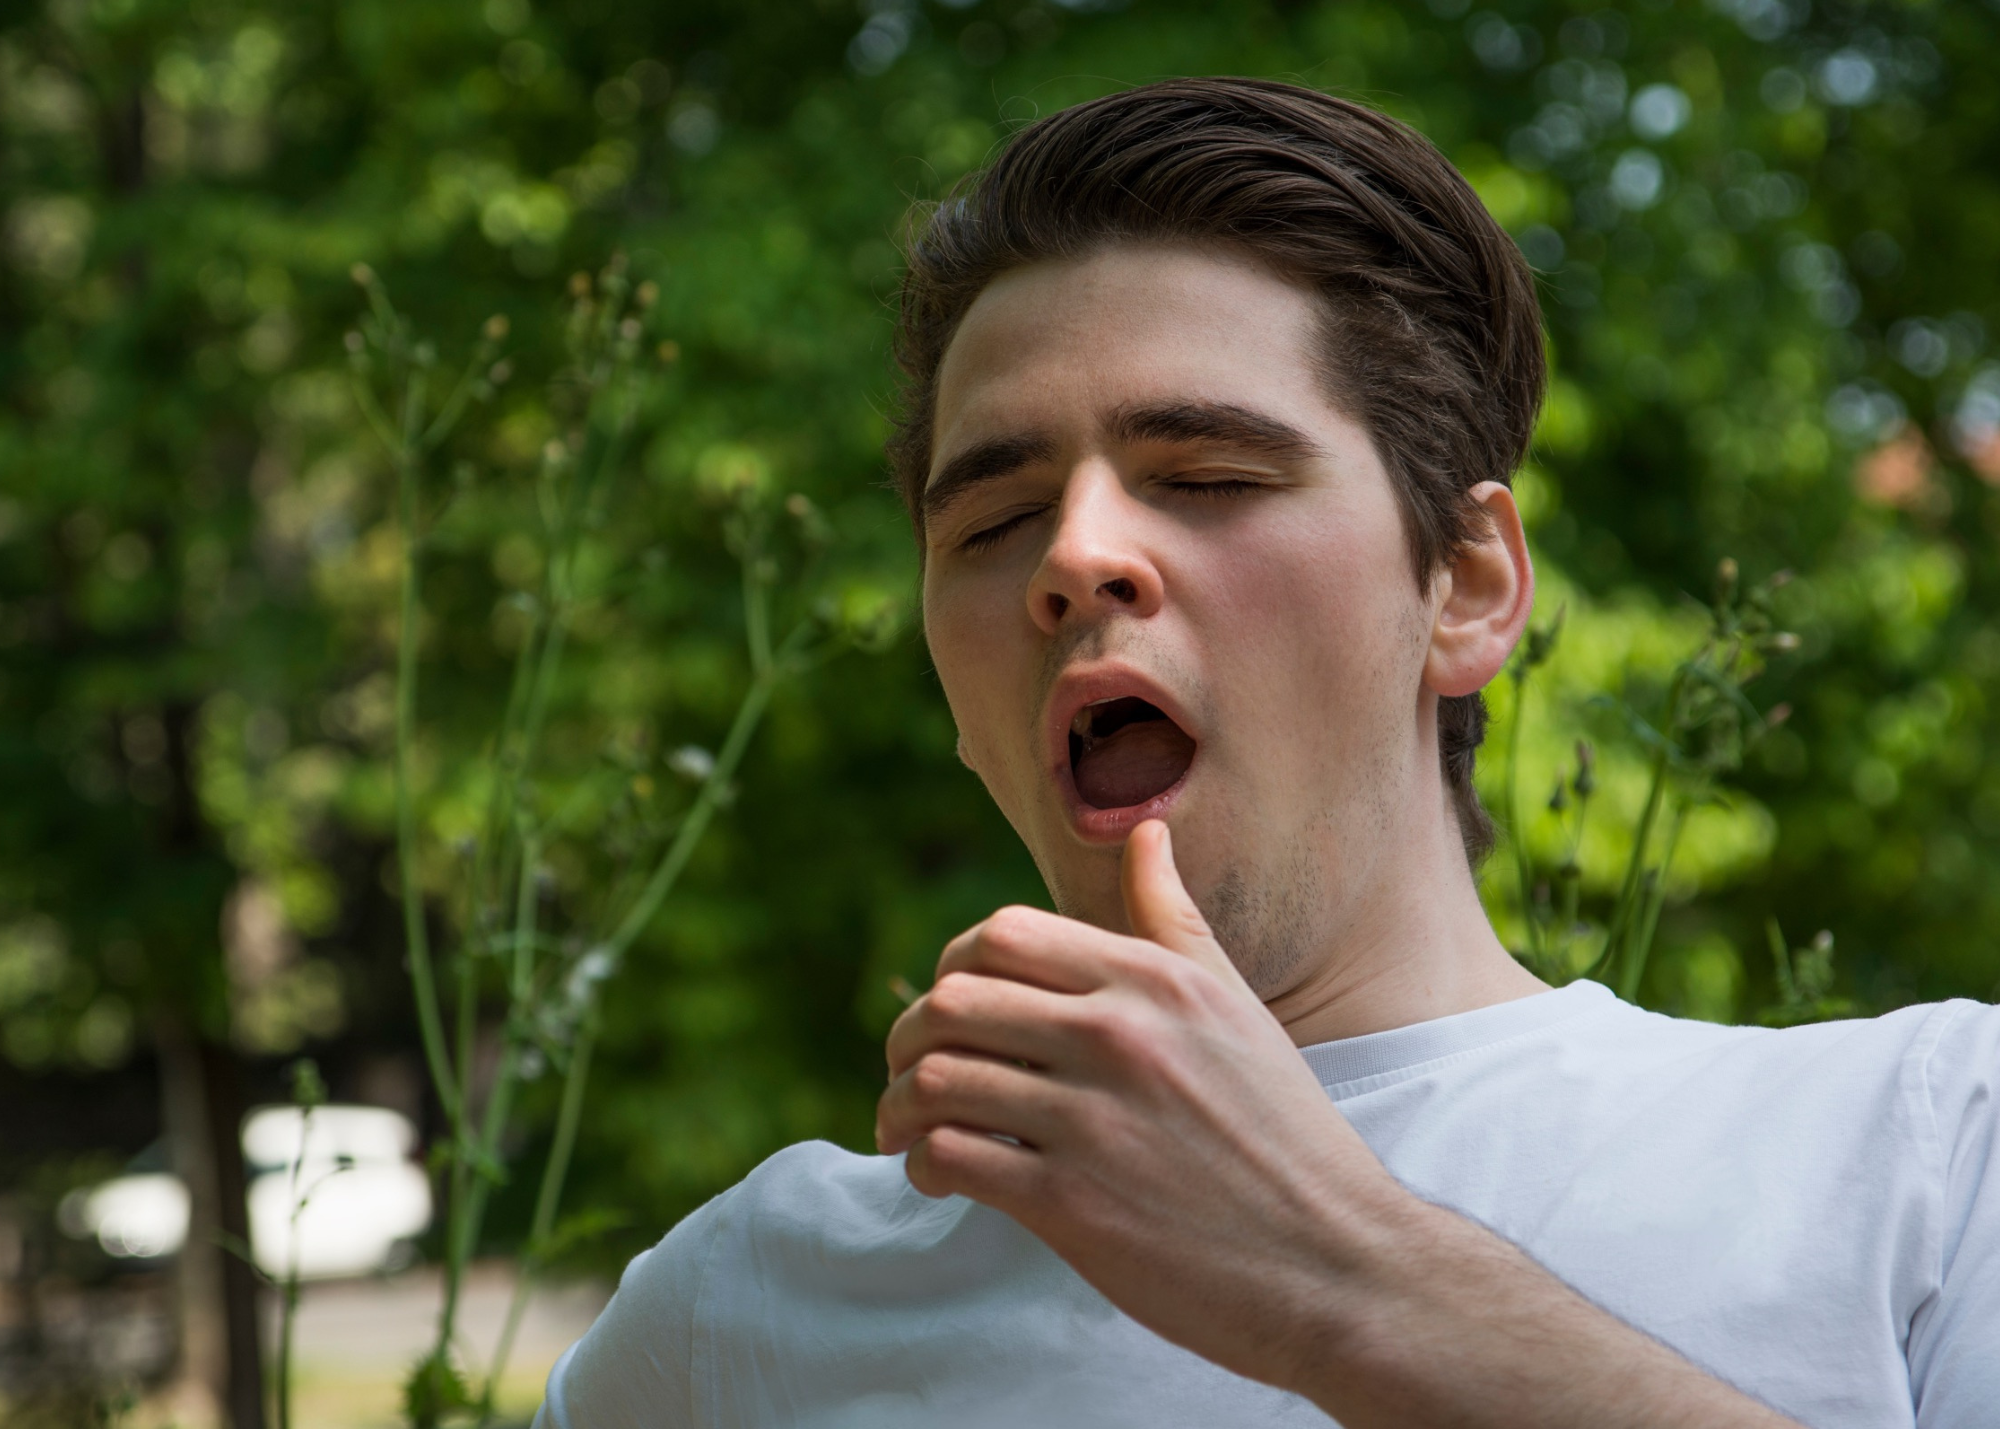 Person outdoors sneezing